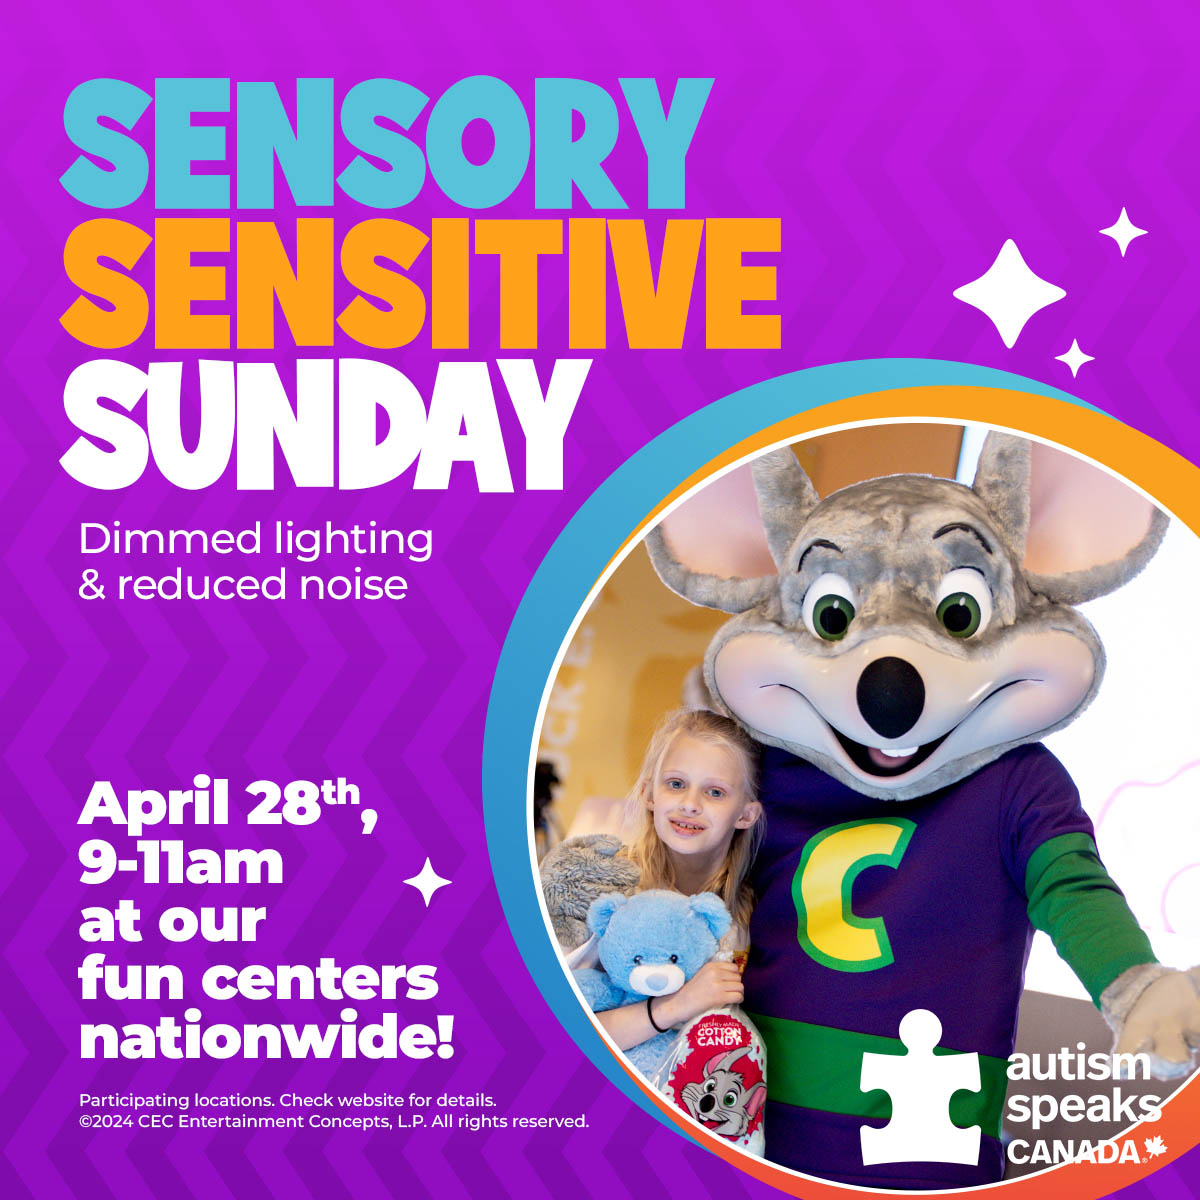 Join us Apr. 28 for a Sensory Sensitive Sundays event at Chuck E. Cheese, They will open two hours early to provide a sensory-friendly dining and arcade experience specifically for children with autism and other special needs. Learn more at: chuckecheese.com/sensory-sensit… #autism#WAM